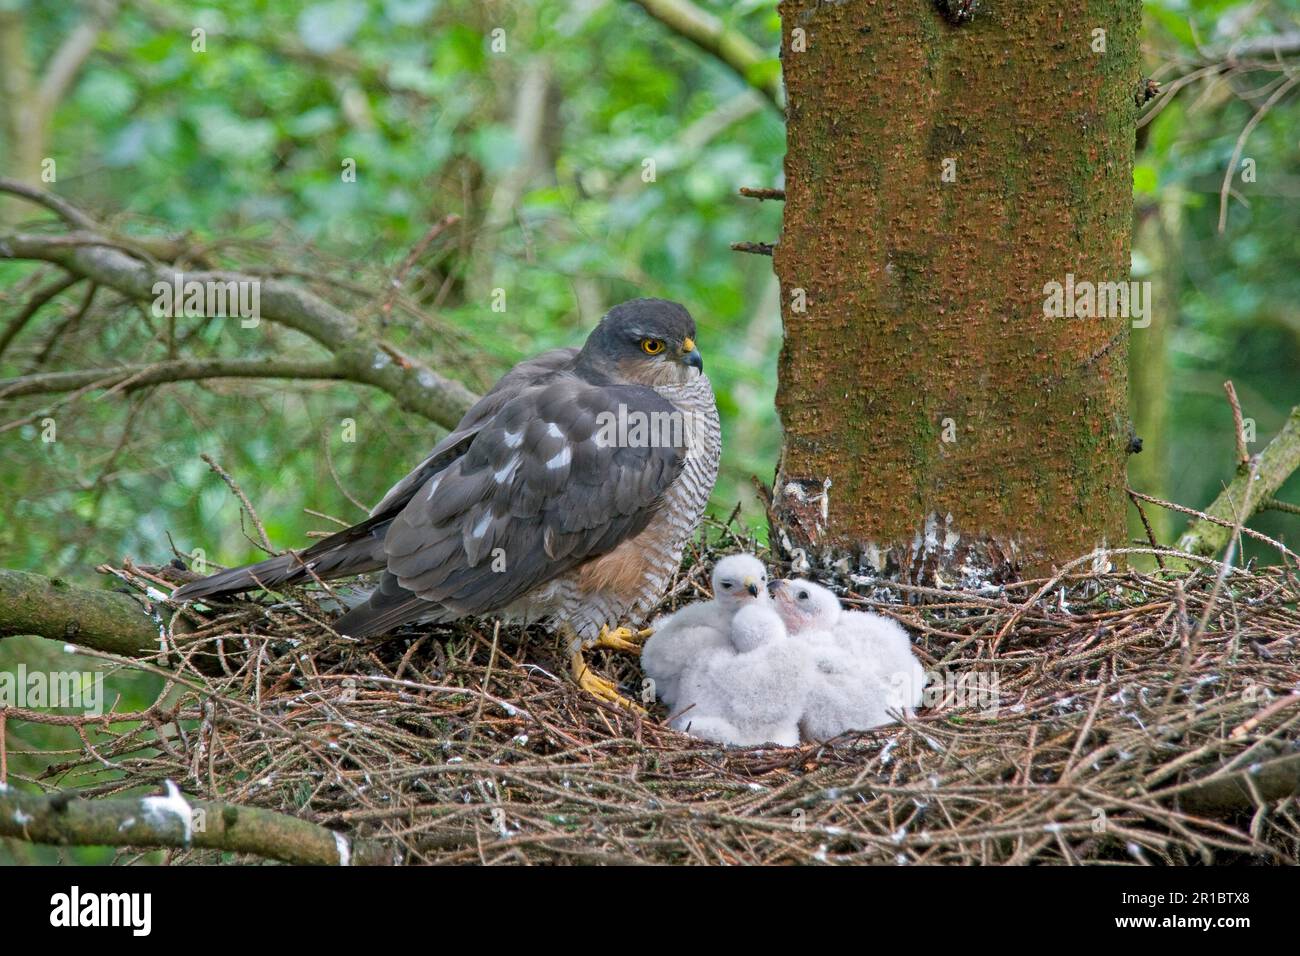 Eurasian sparrowhawk (Accipiter nisus) adult female, with chicks in nest, nesting in fir tree, England, United Kingdom Stock Photo